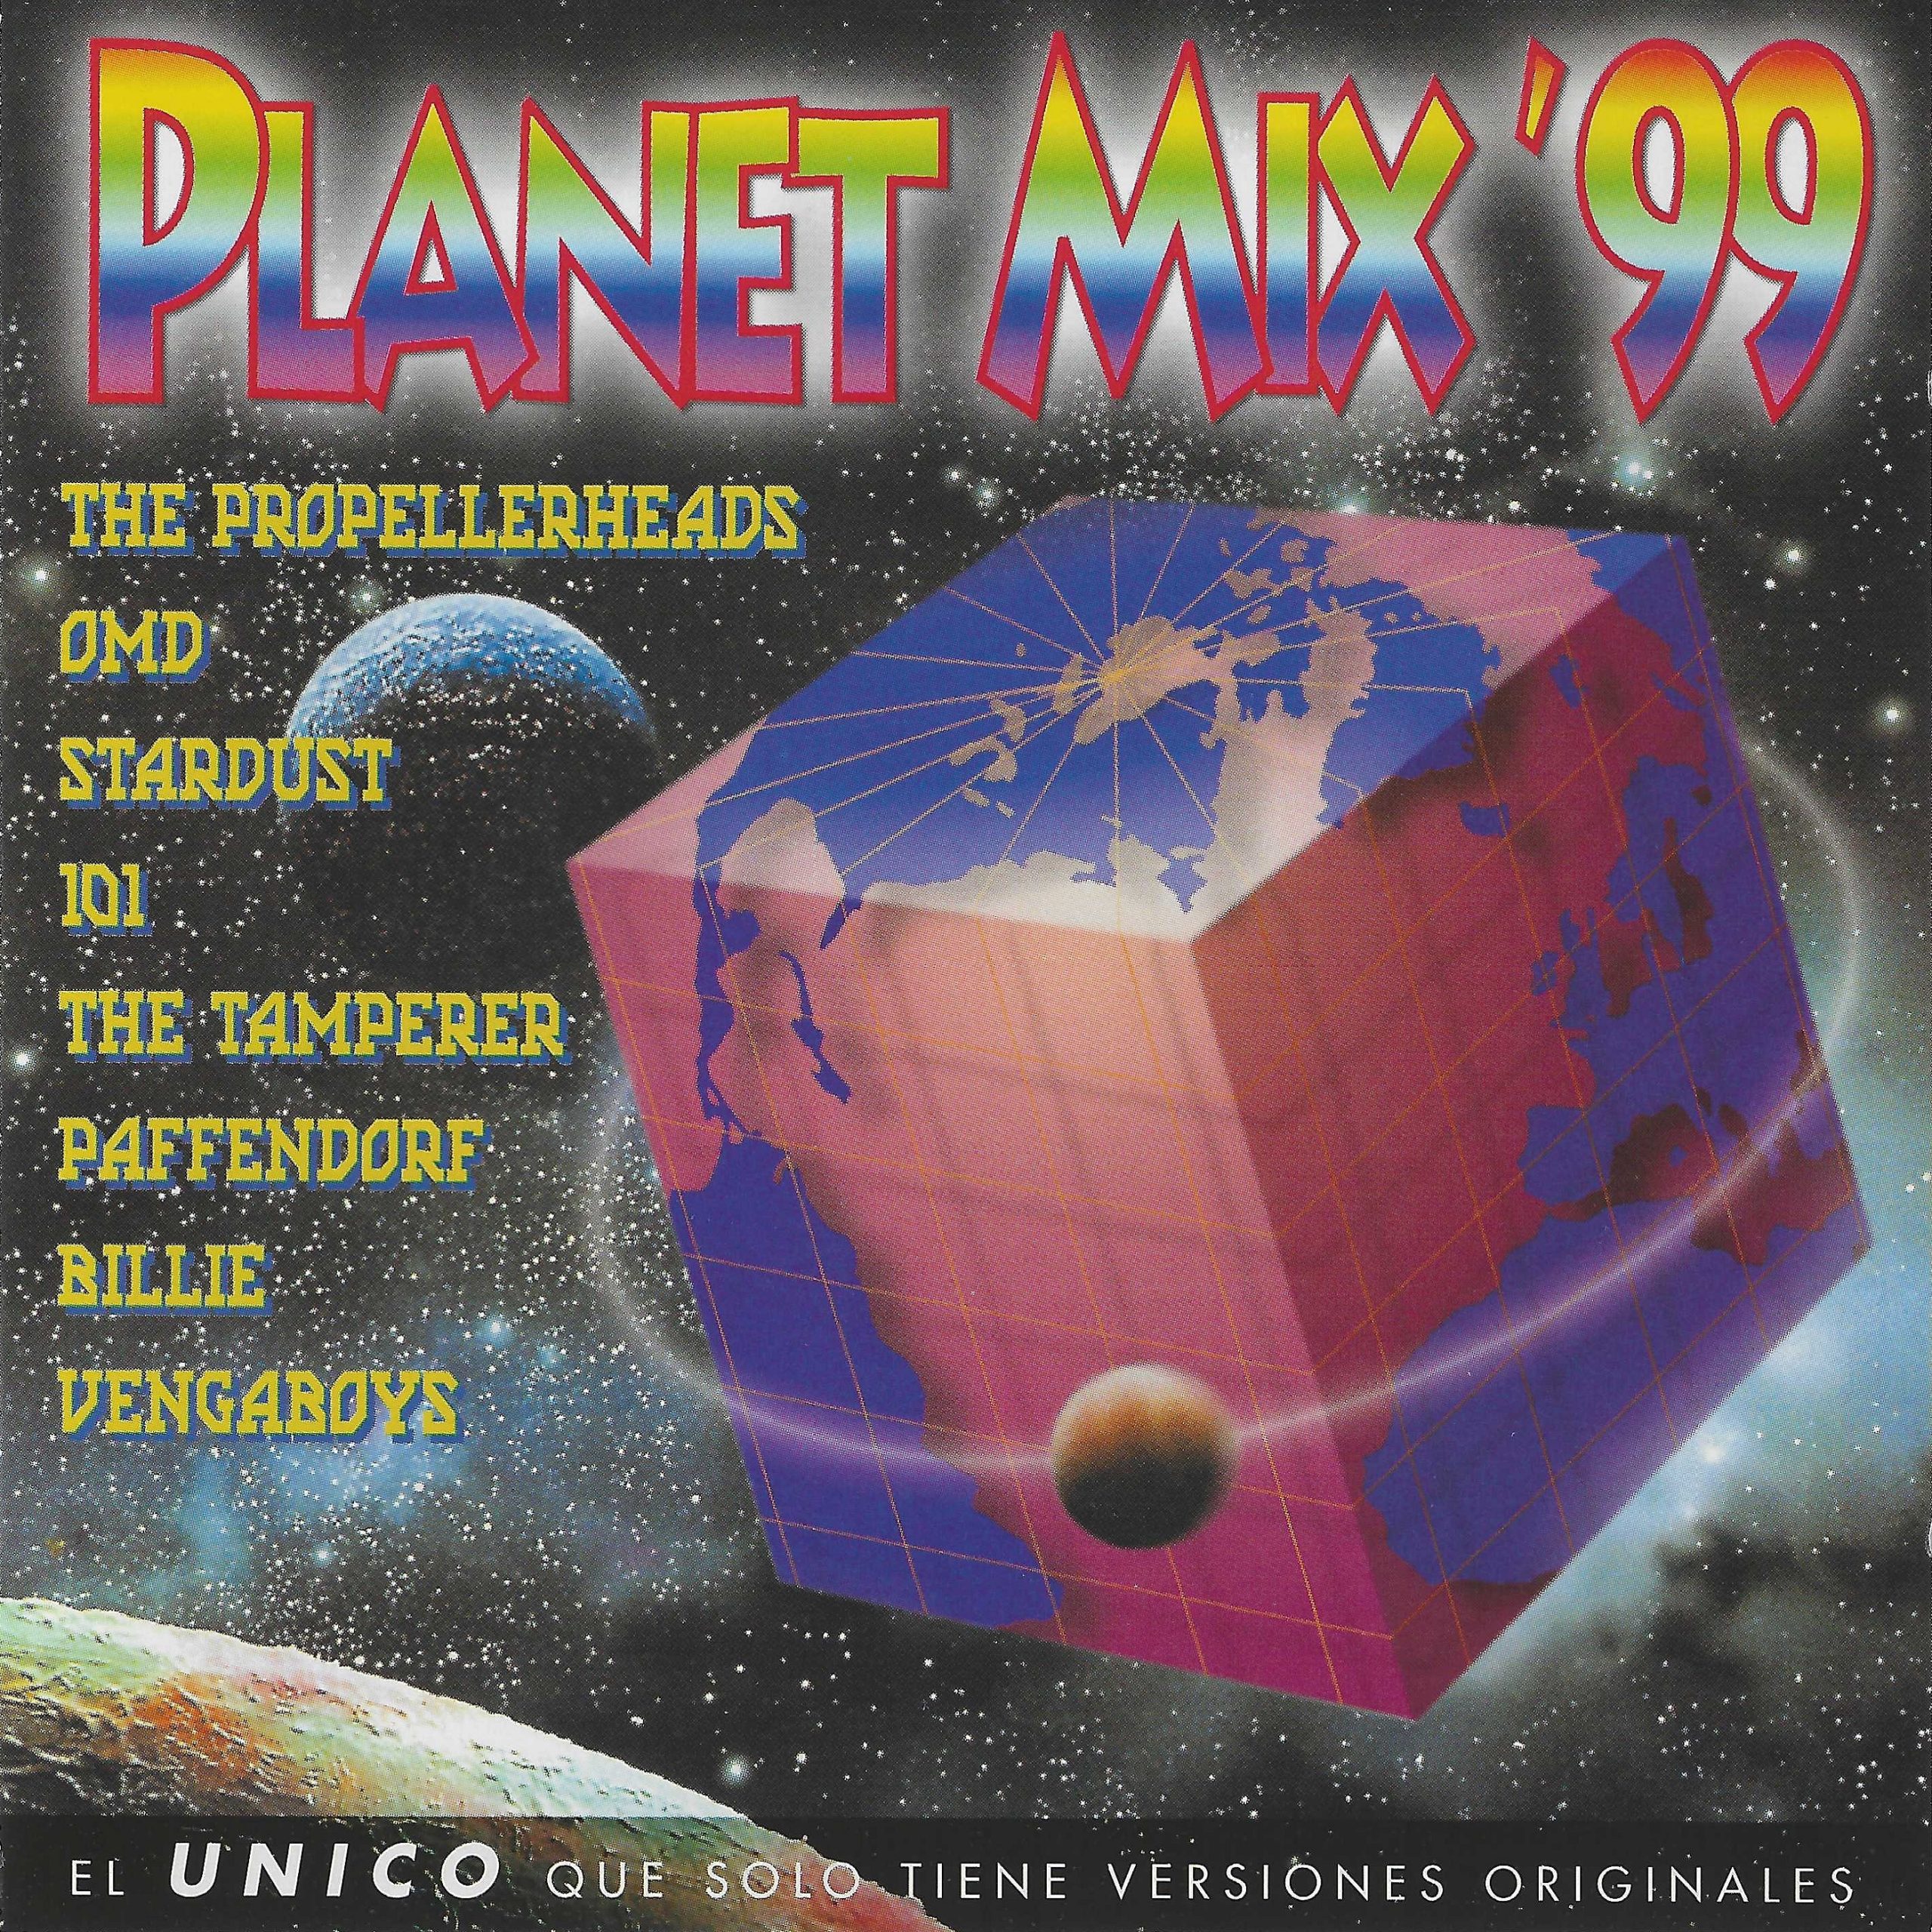 Mix planet. 99 Планета. Emy Care read my Mind Extended Disco Mix. Paffendorf Planet Dance.